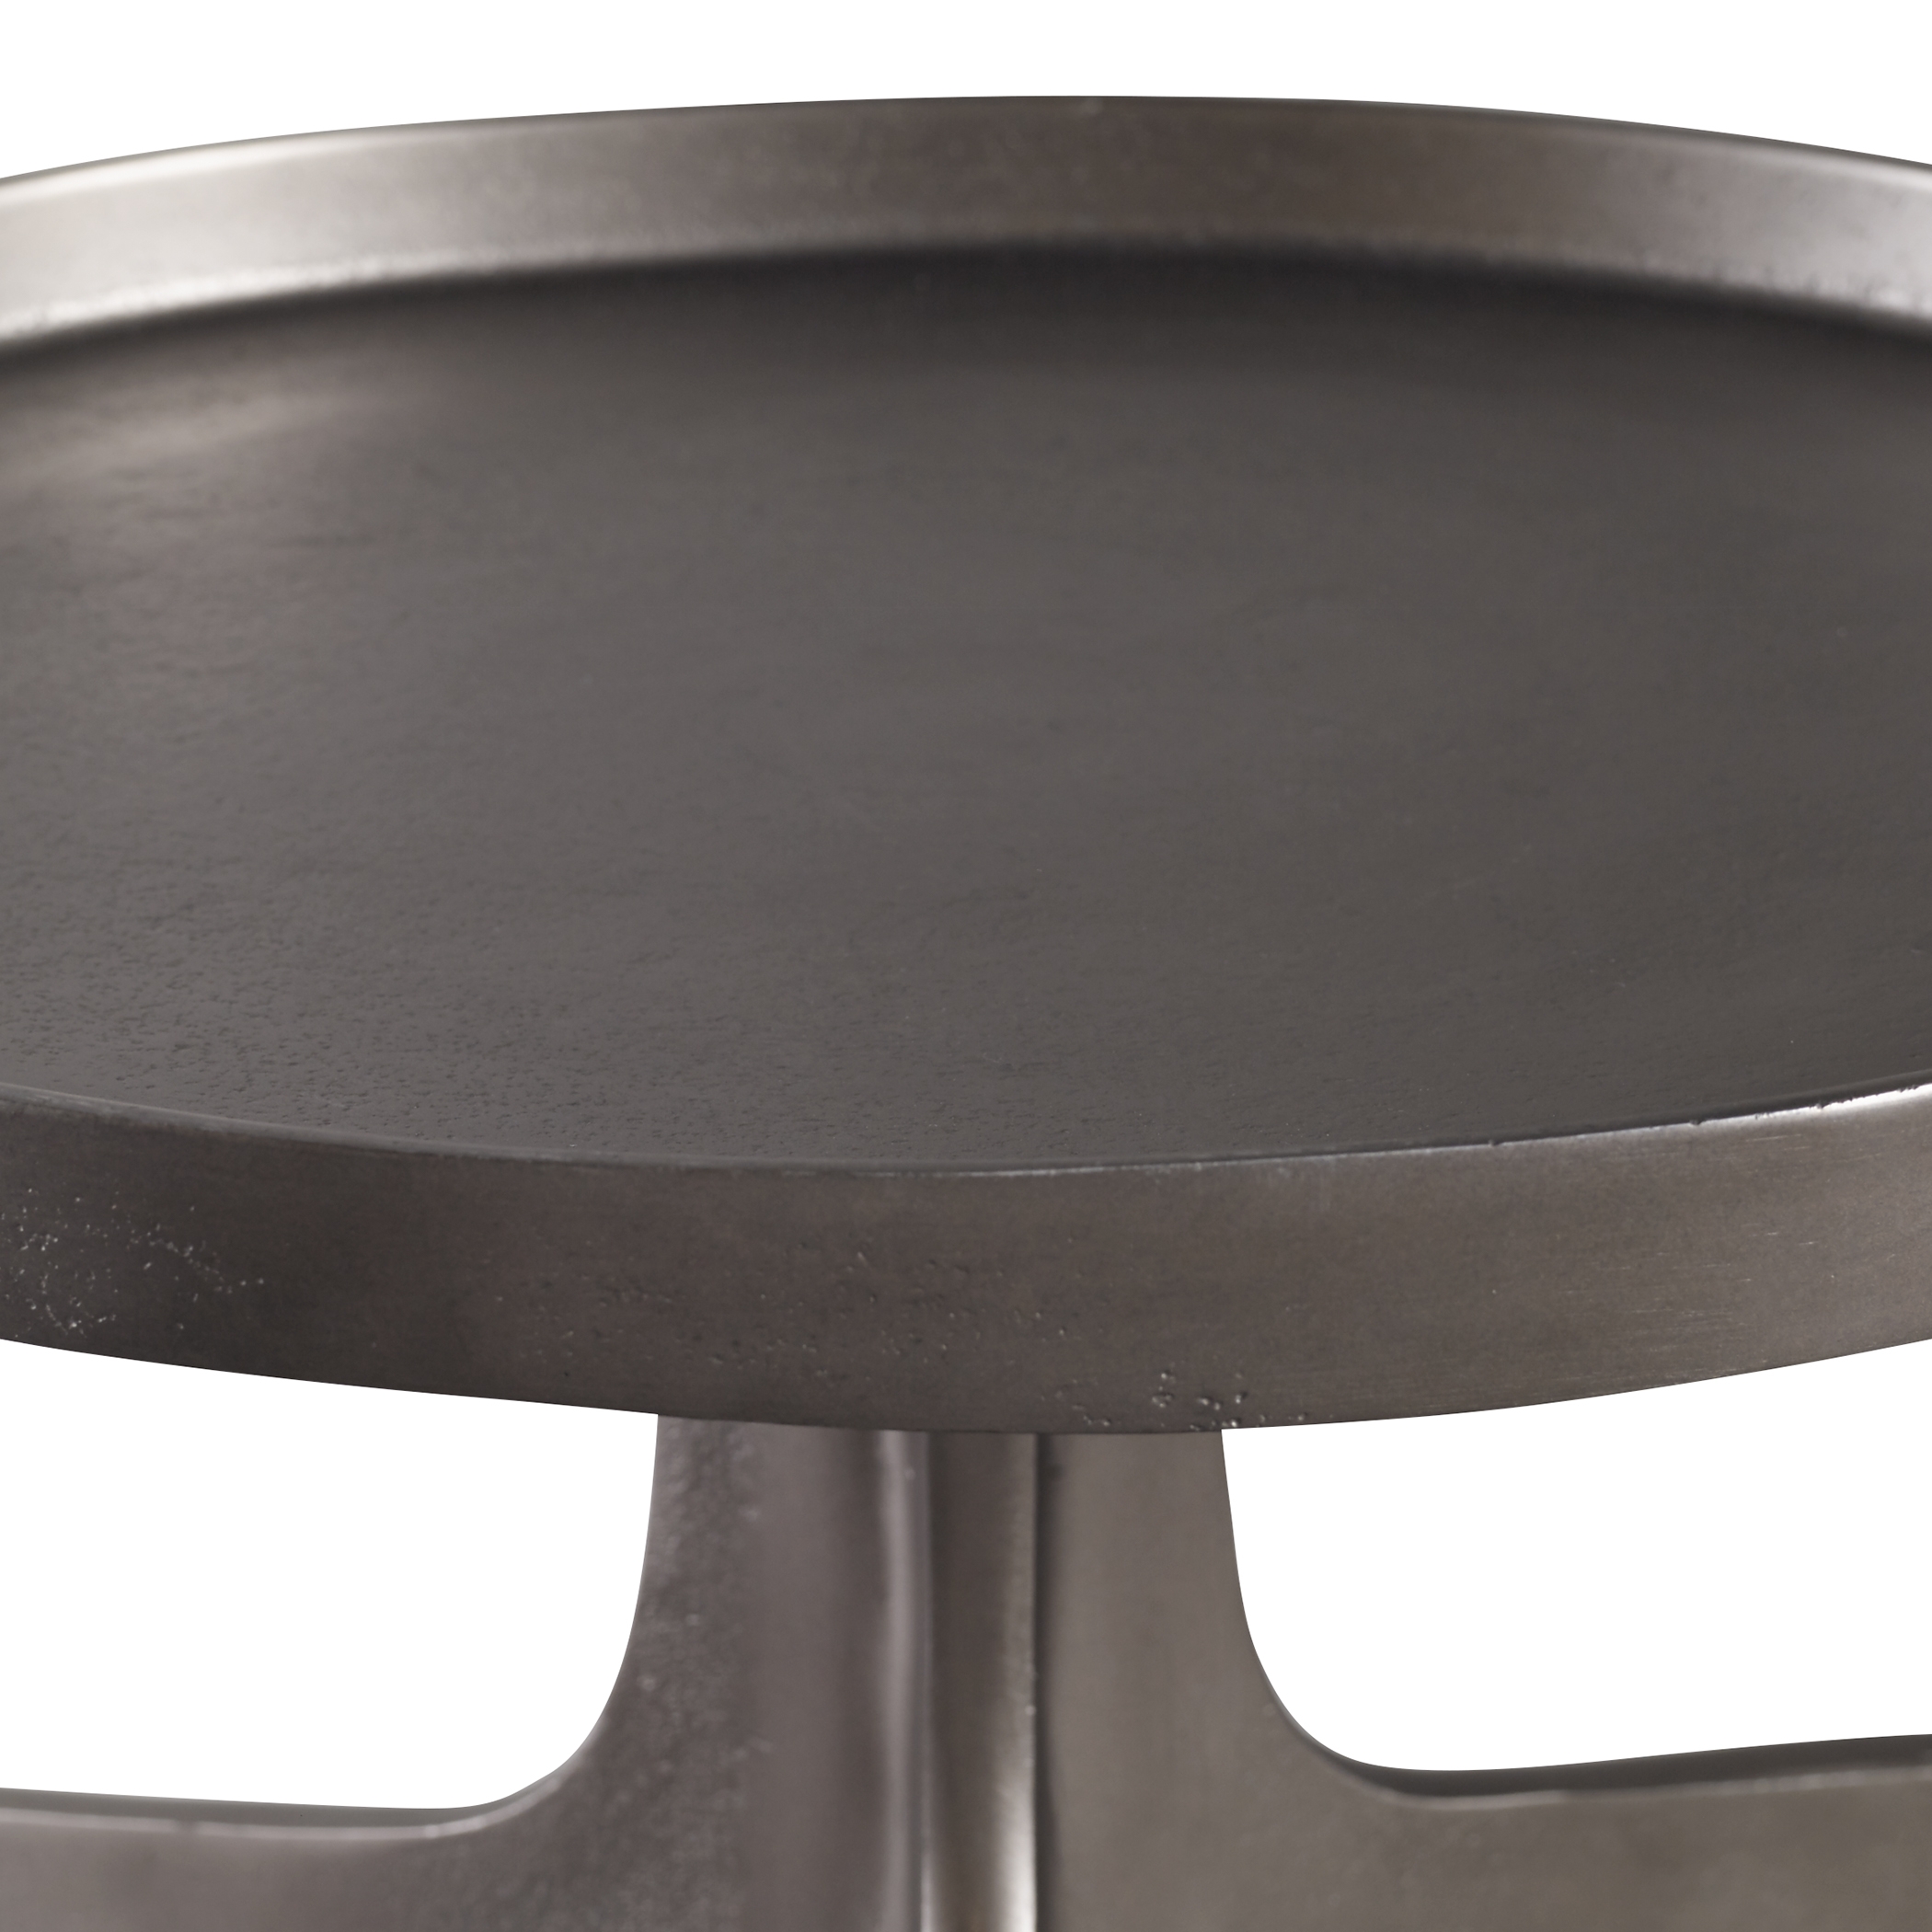 Kenna Nickel Accent Table - Image 2